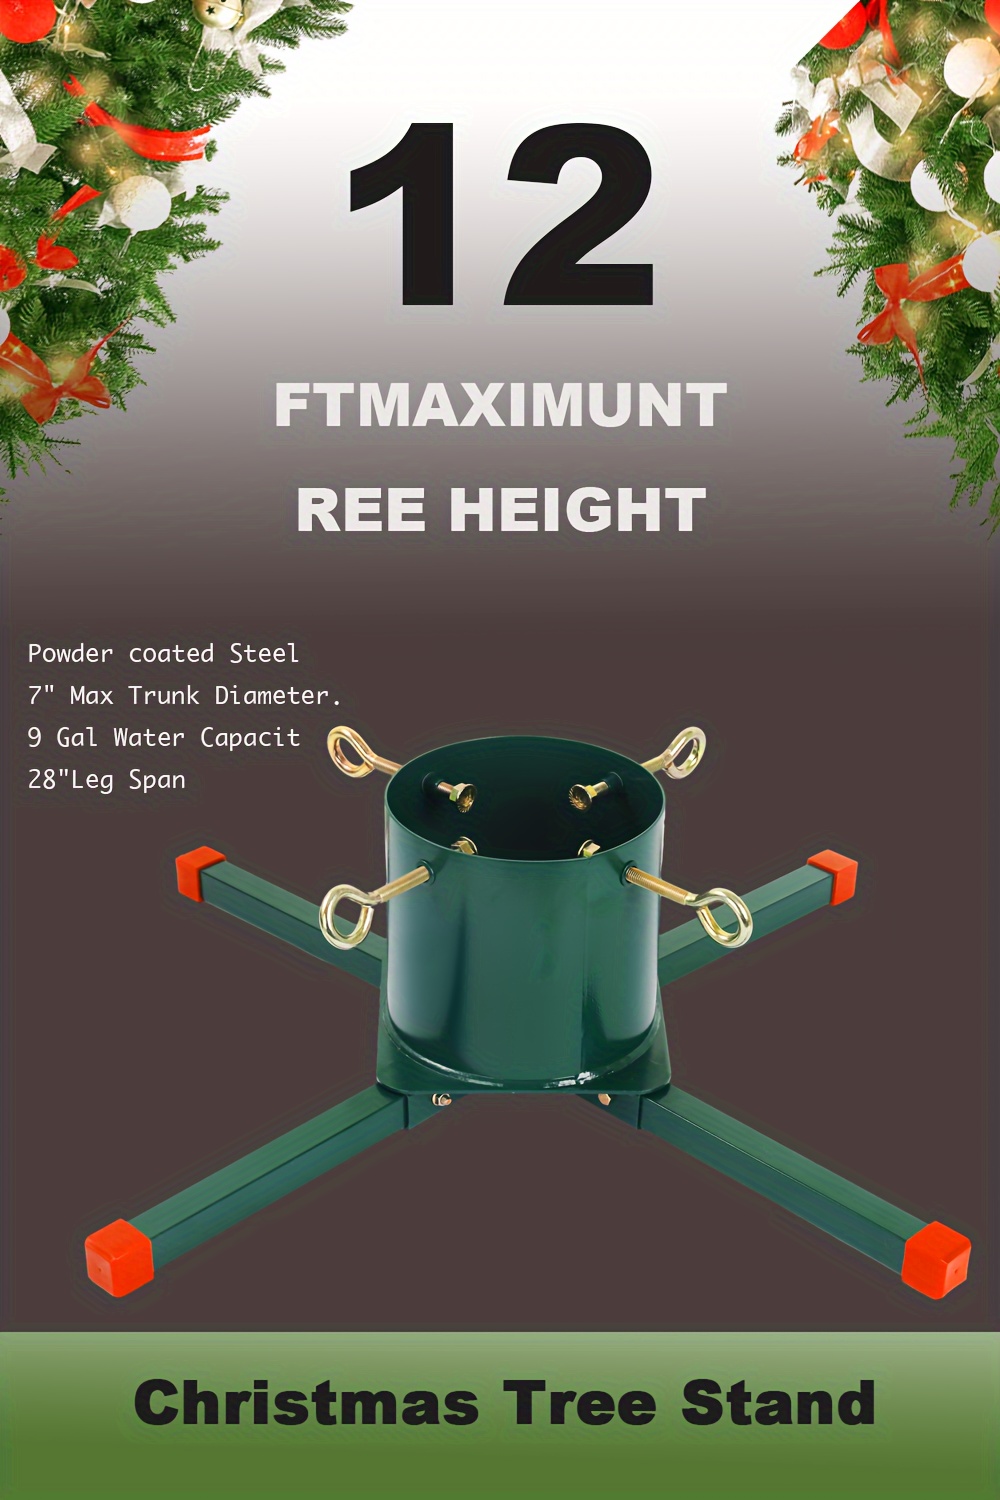 Tree Stands - Orman Inc.